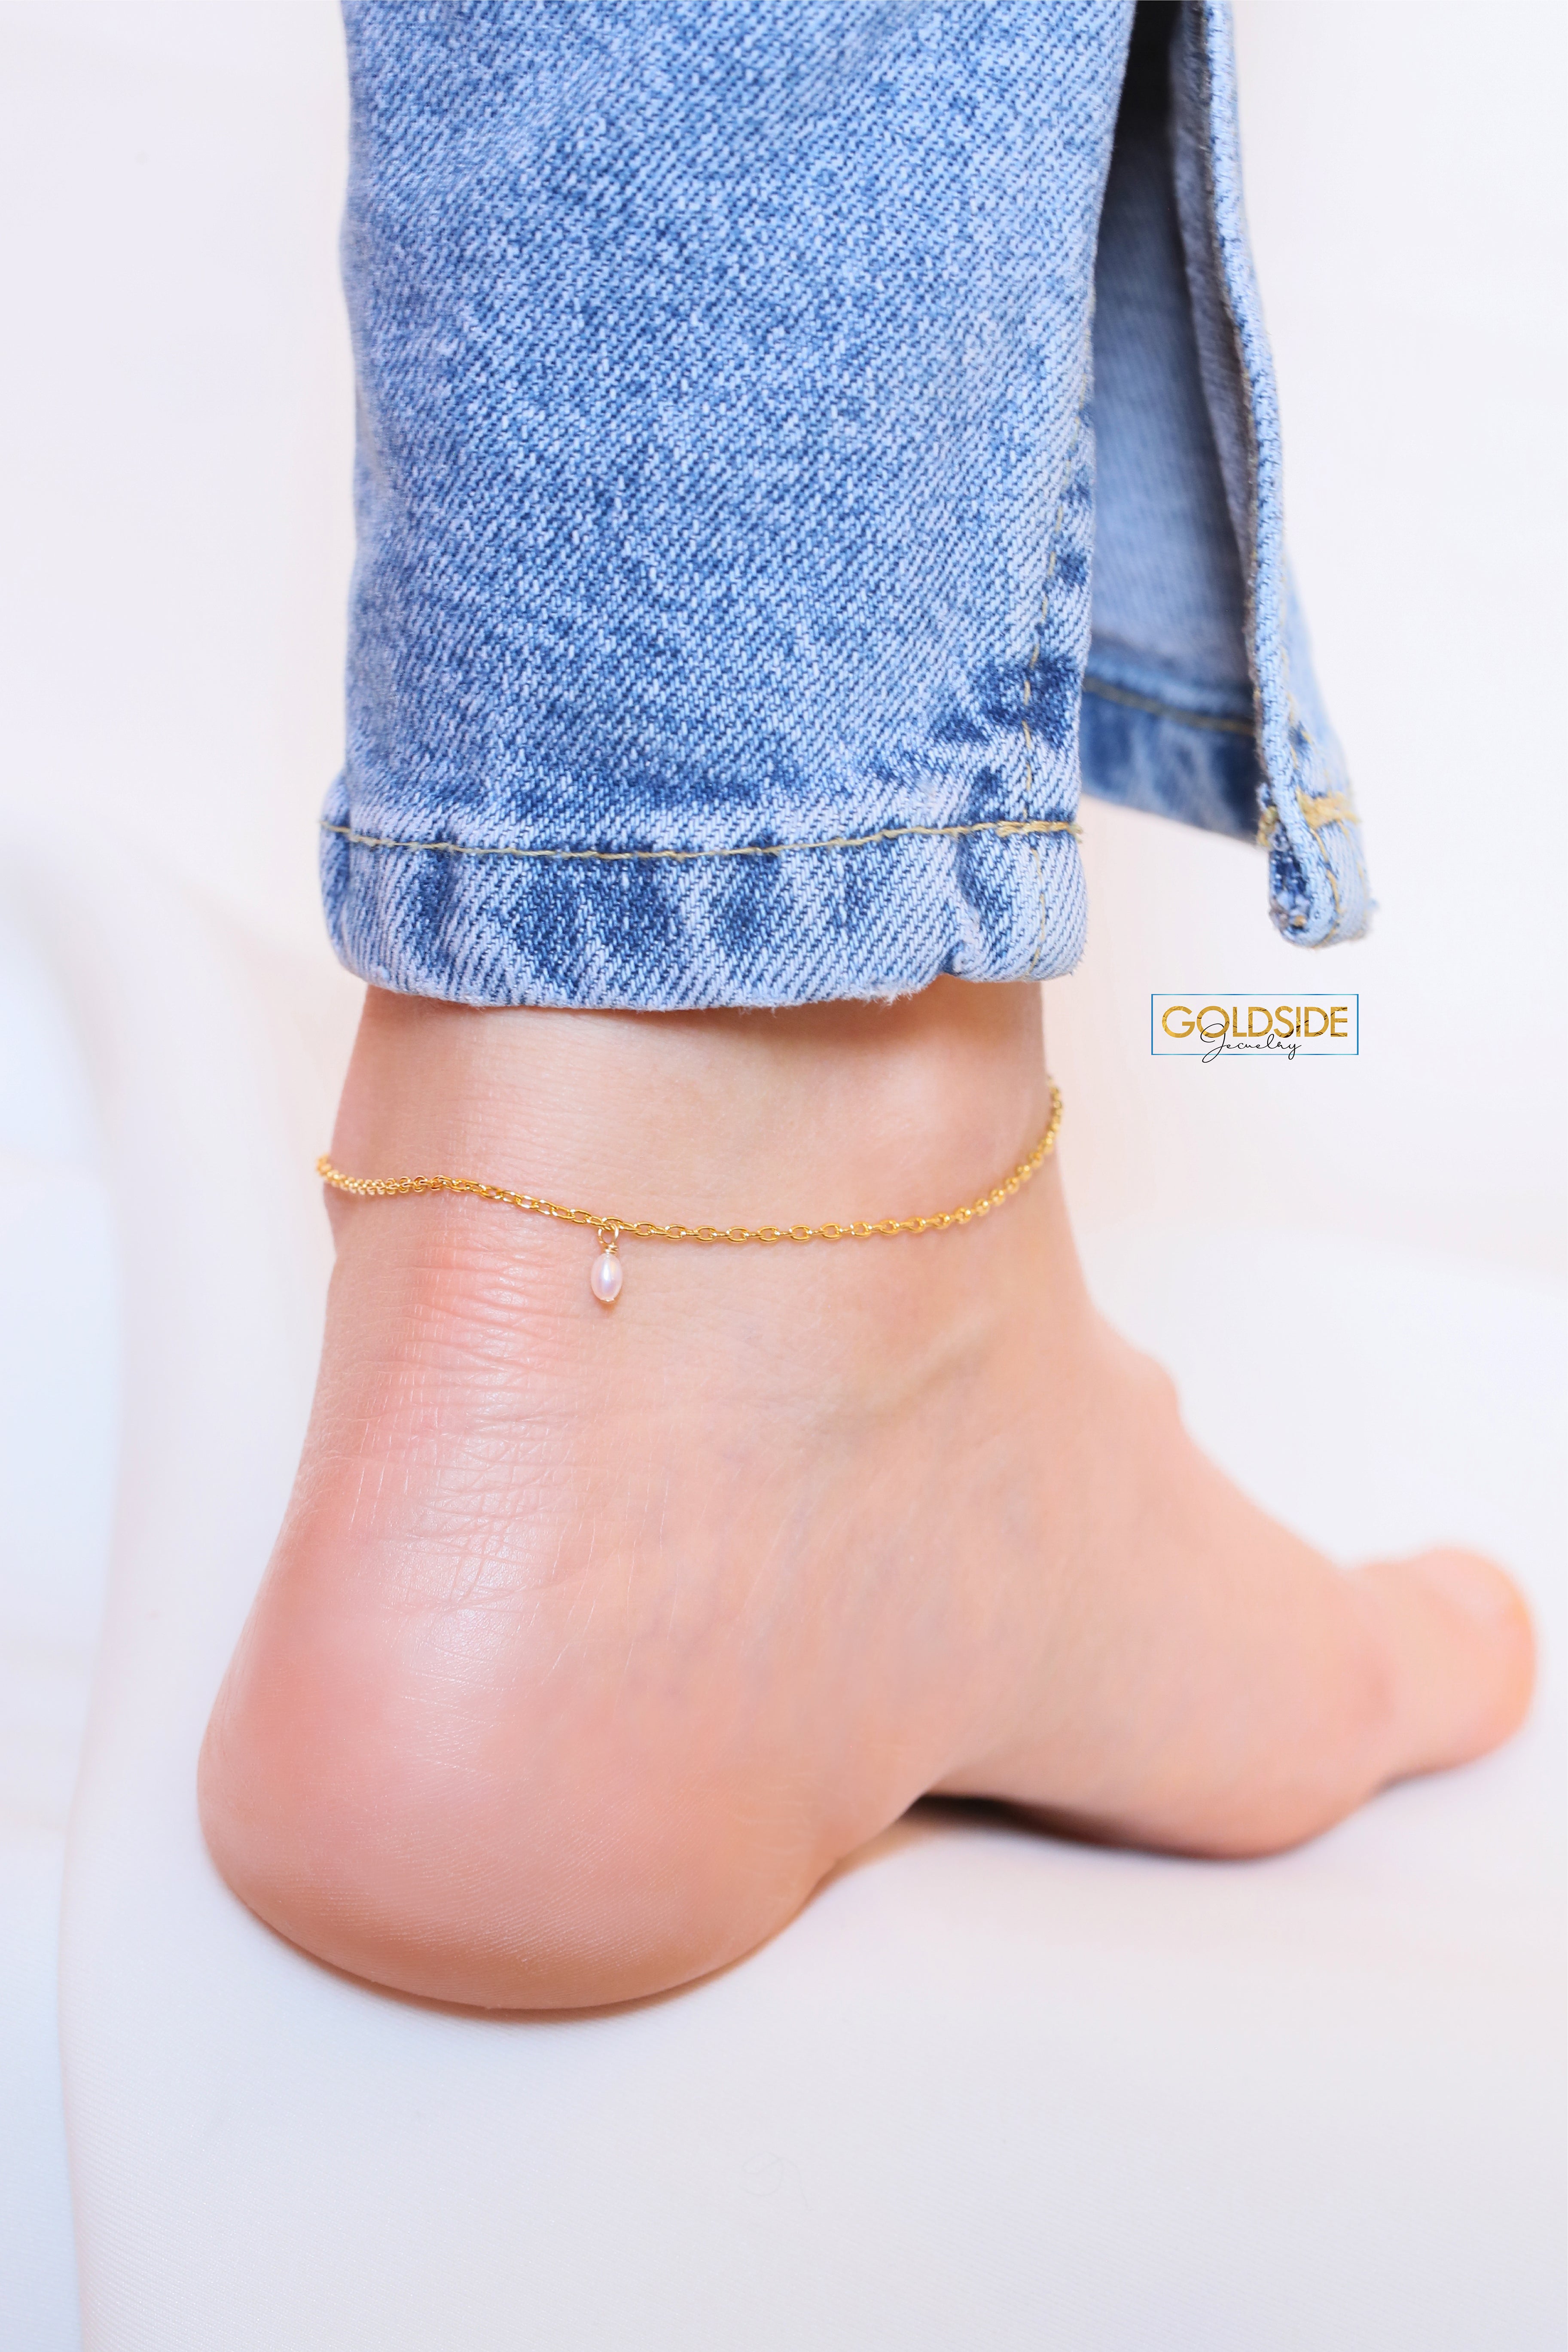 A Pearl Anklet